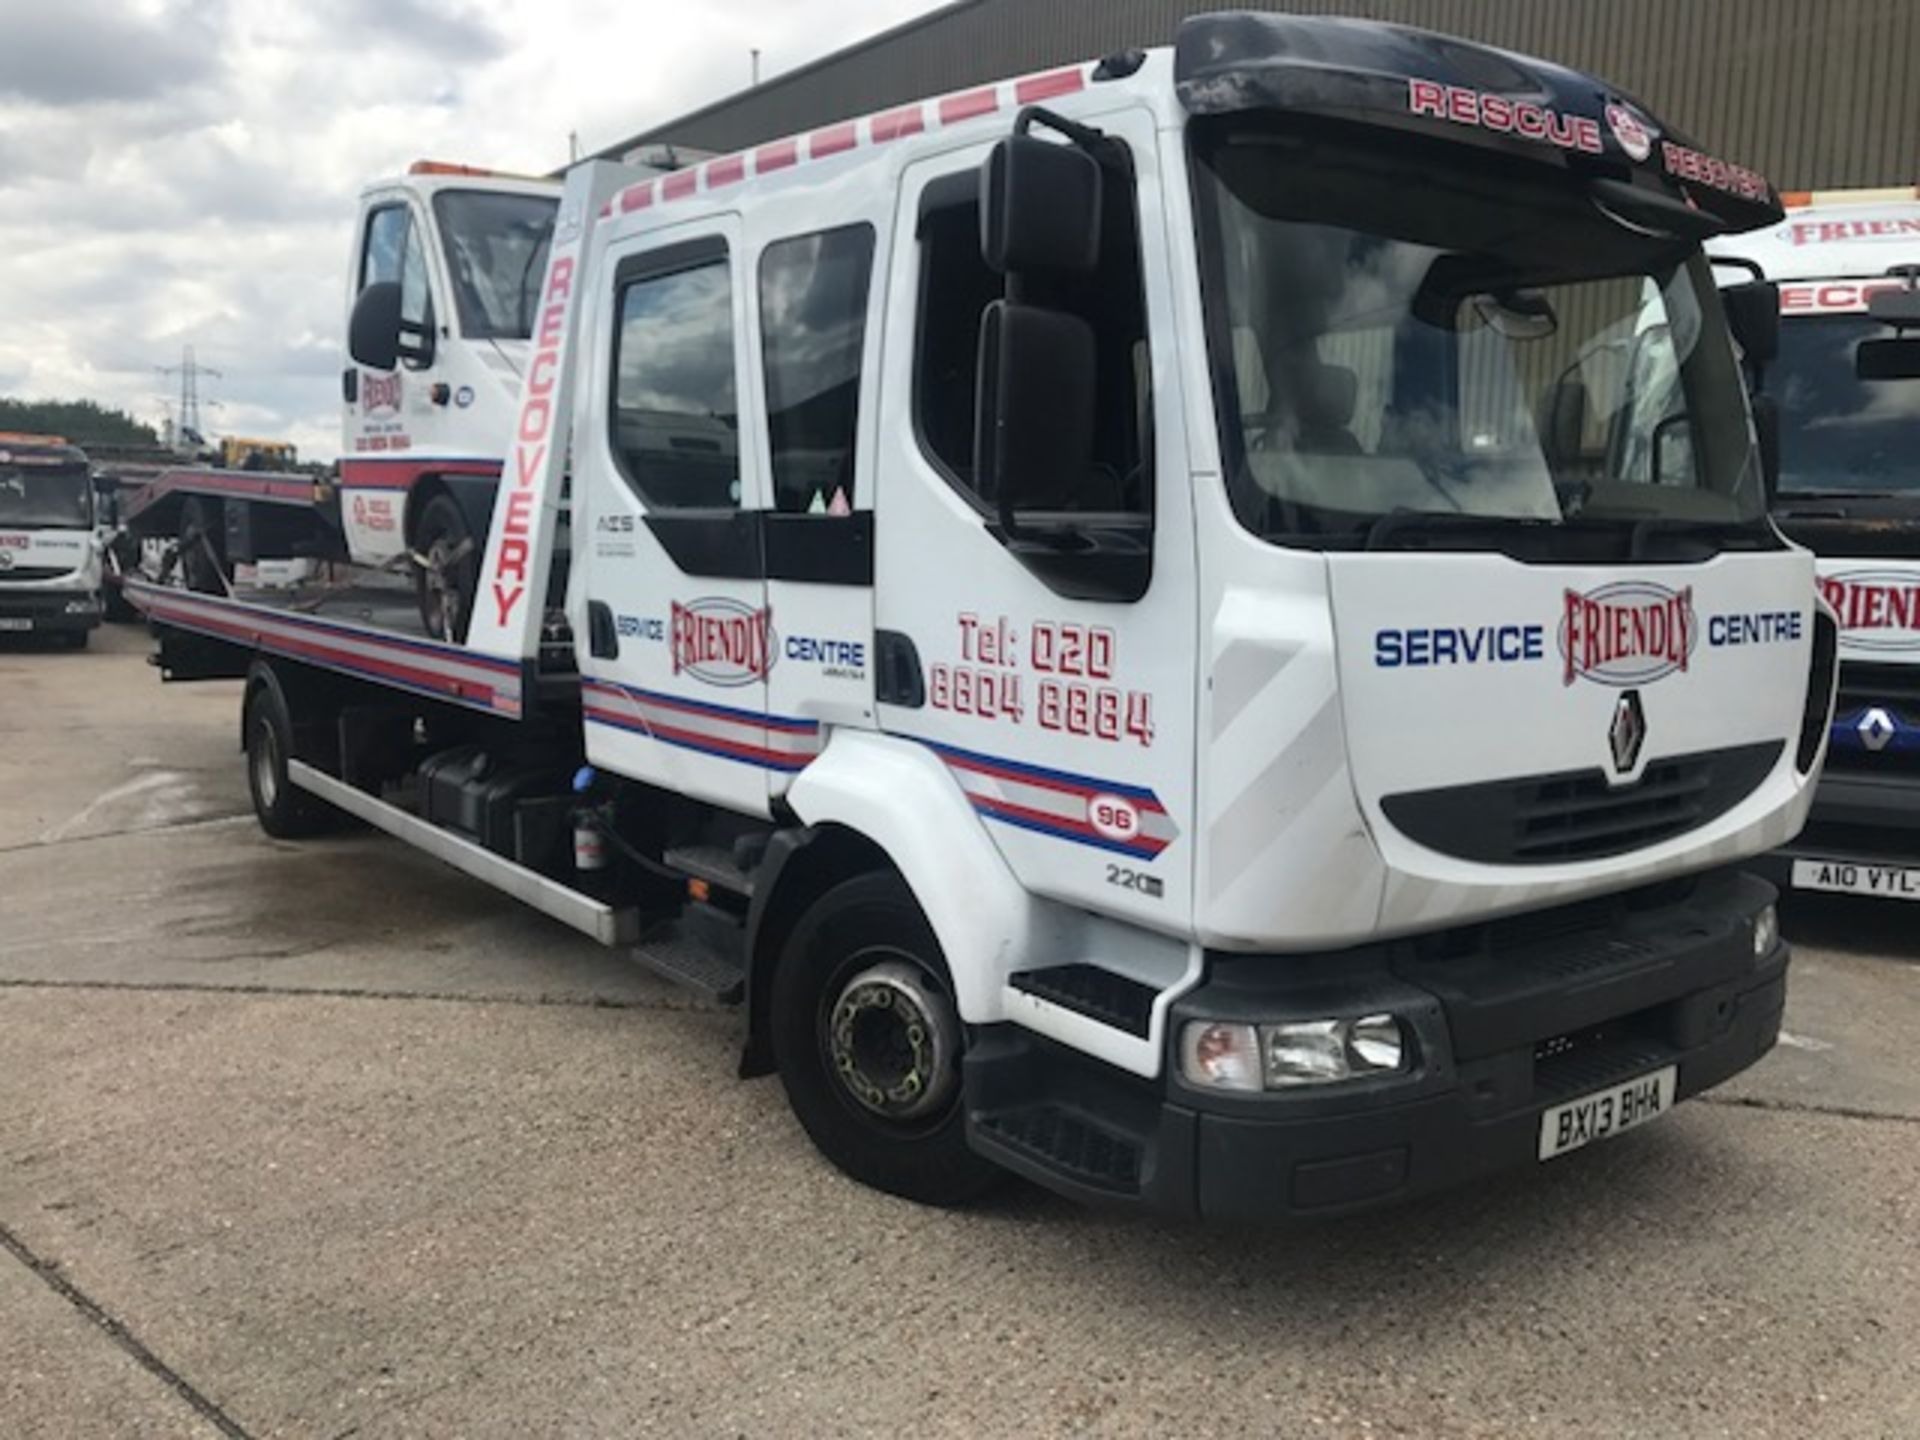 2013 Renault Midlum 220 Dxi crew cab tilt and slide breakdown recovery vehicle complete with spec.